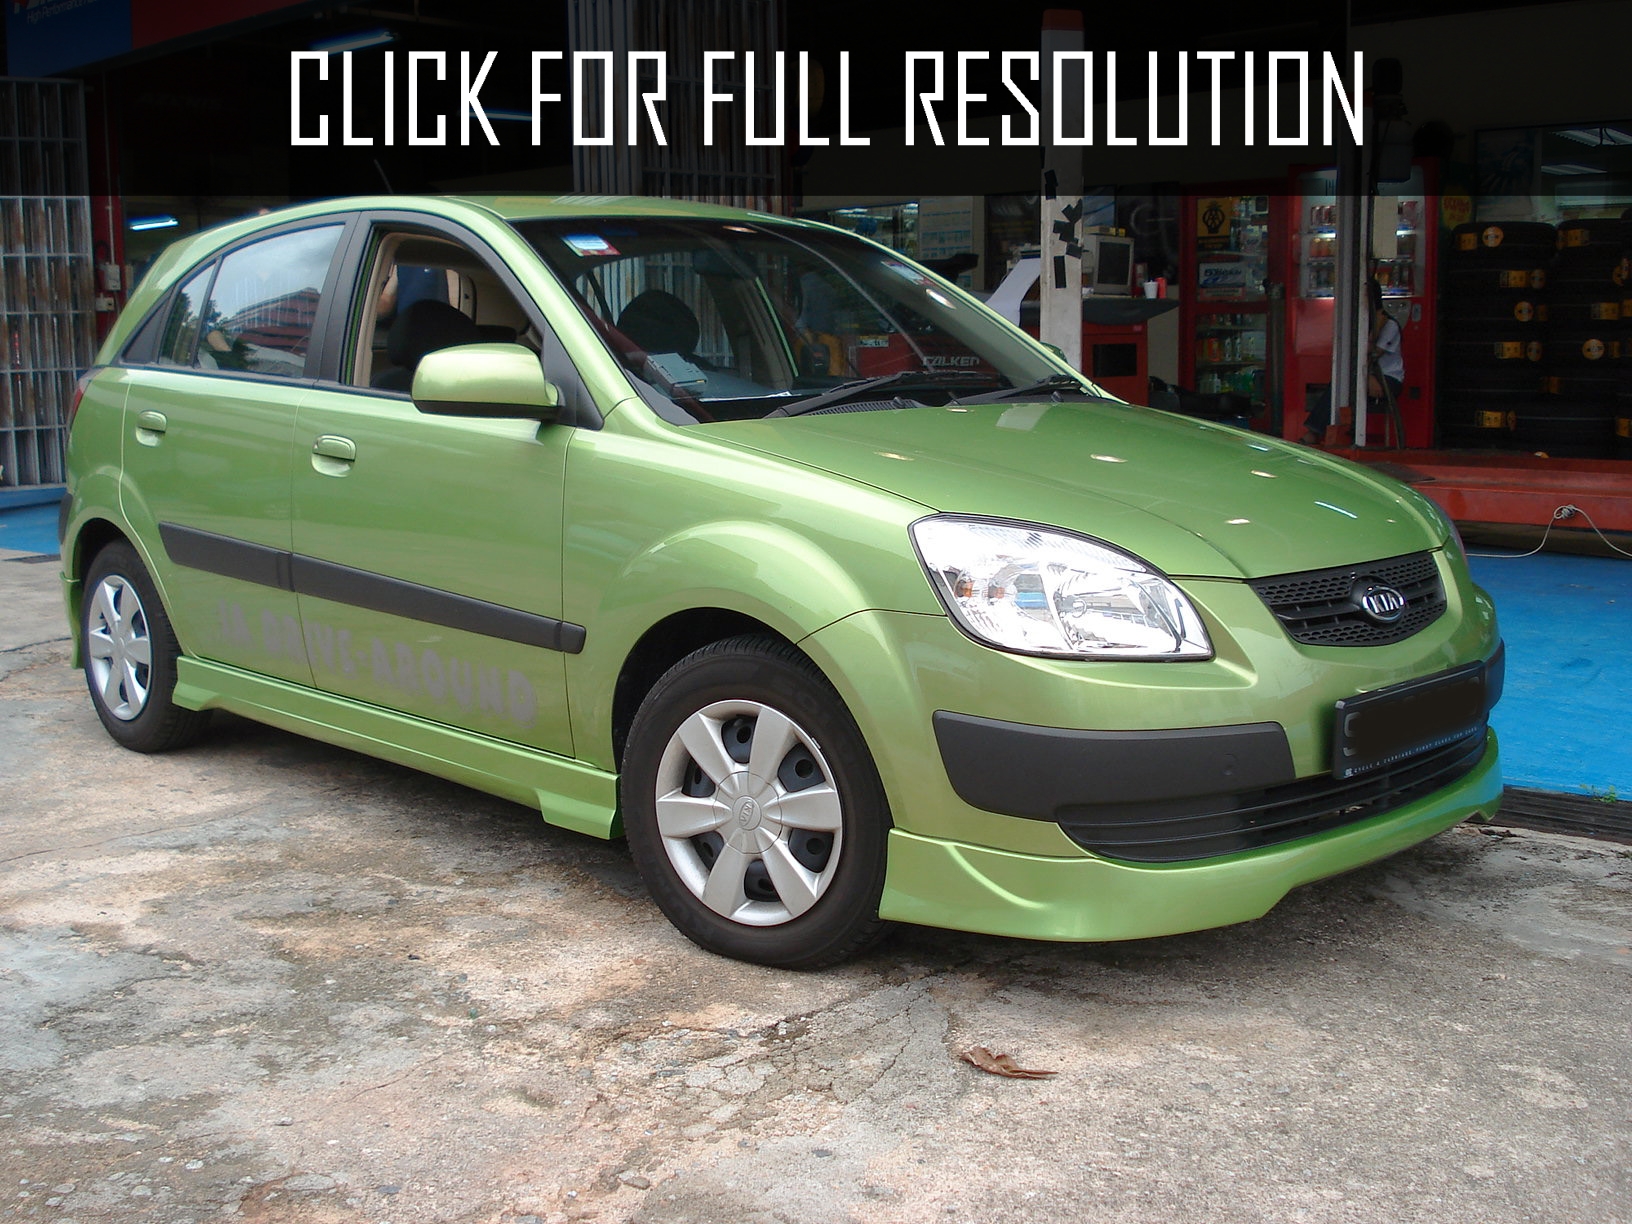 2006 Kia Rio Hatchback news, reviews, msrp, ratings with